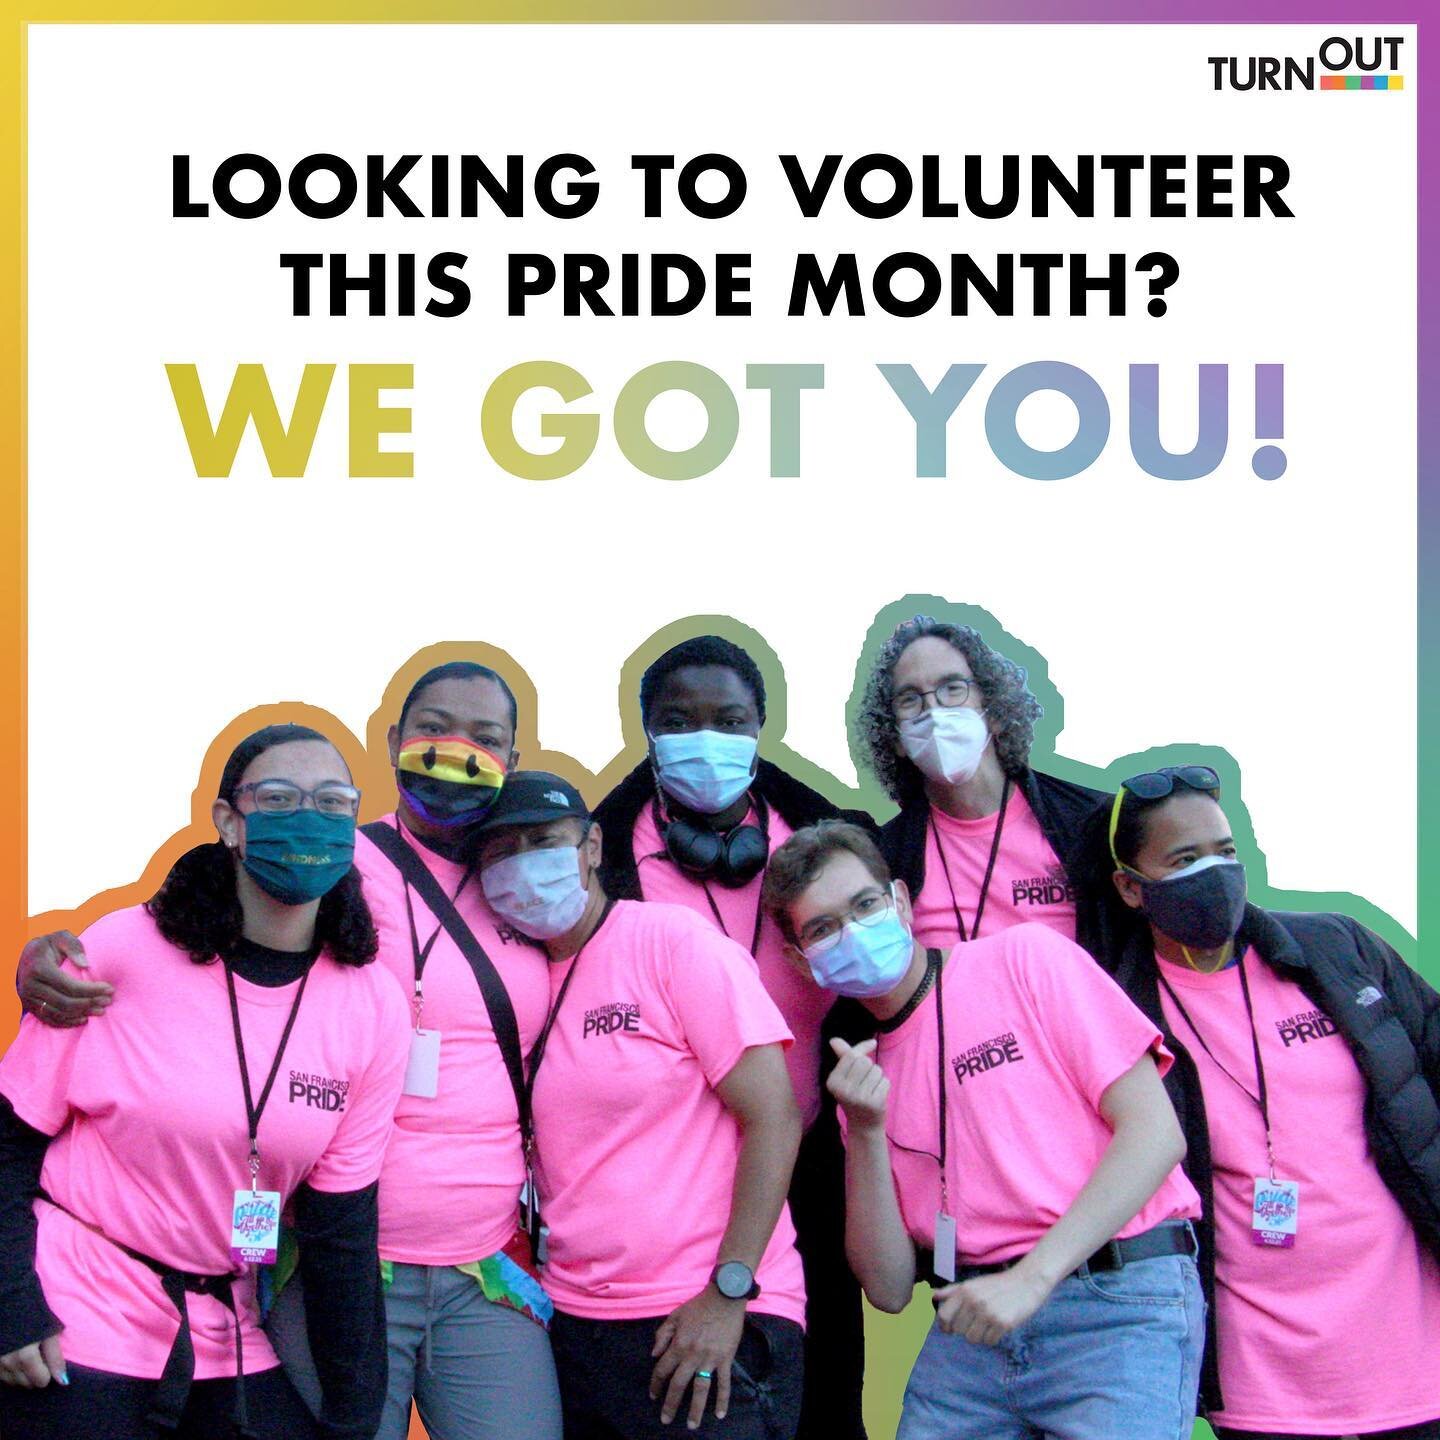 ✨Looking to volunteer during Pride Month? We got you!✨

June is an important month in the LGBTQ+ community because it marks the anniversary of the Stonewall Riots in 1969. A year later, the first Pride march was held in NYC. Today, Pride month is a t